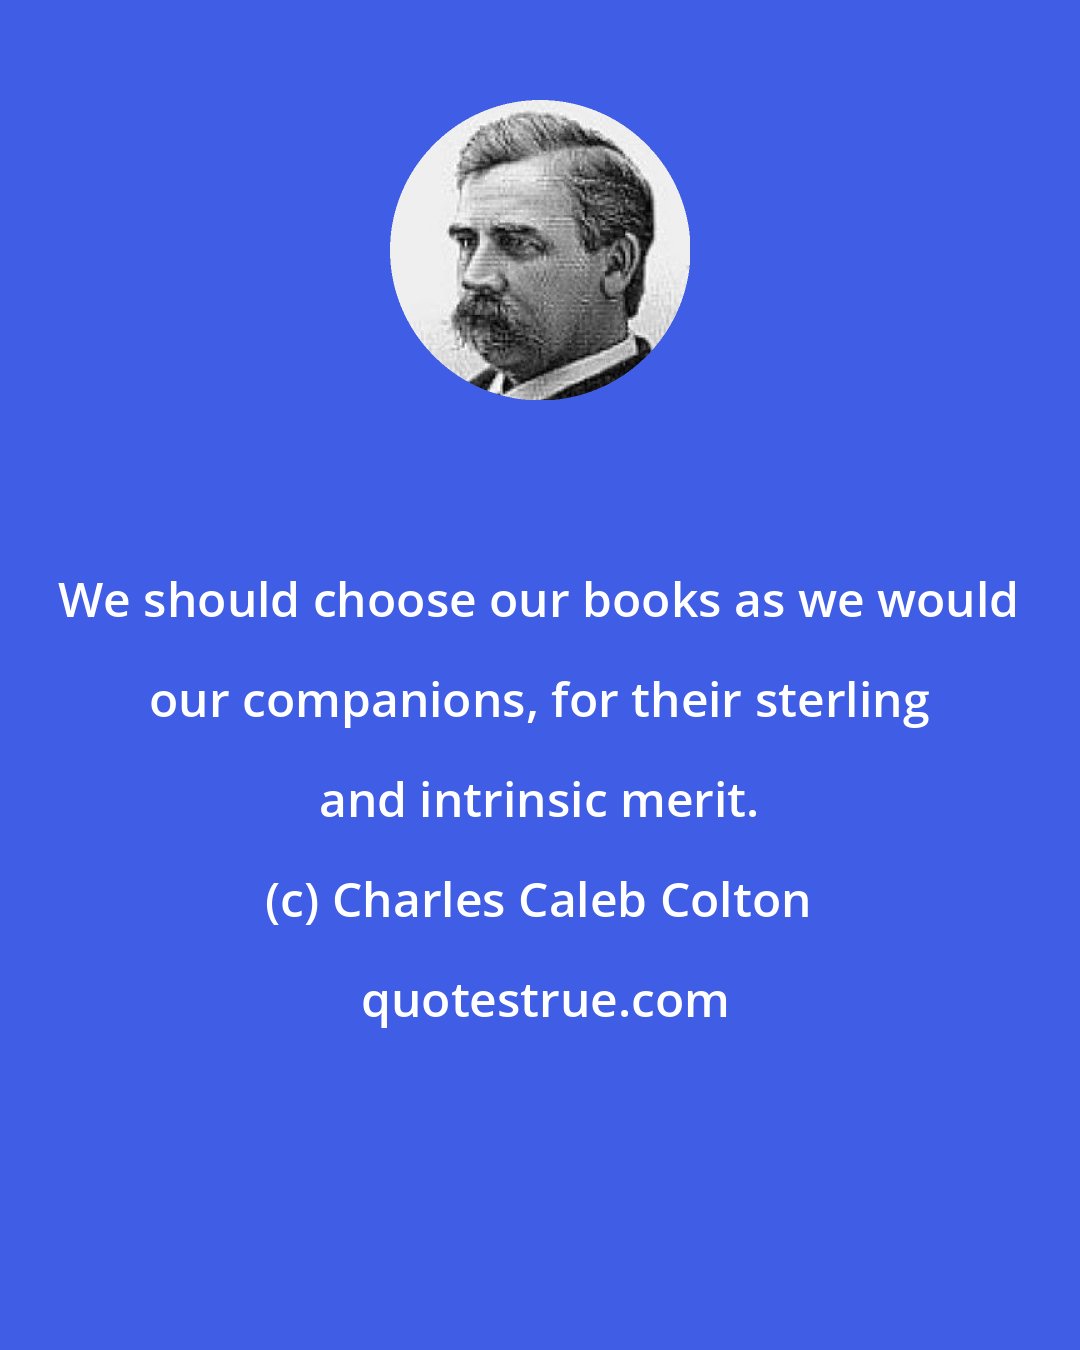 Charles Caleb Colton: We should choose our books as we would our companions, for their sterling and intrinsic merit.